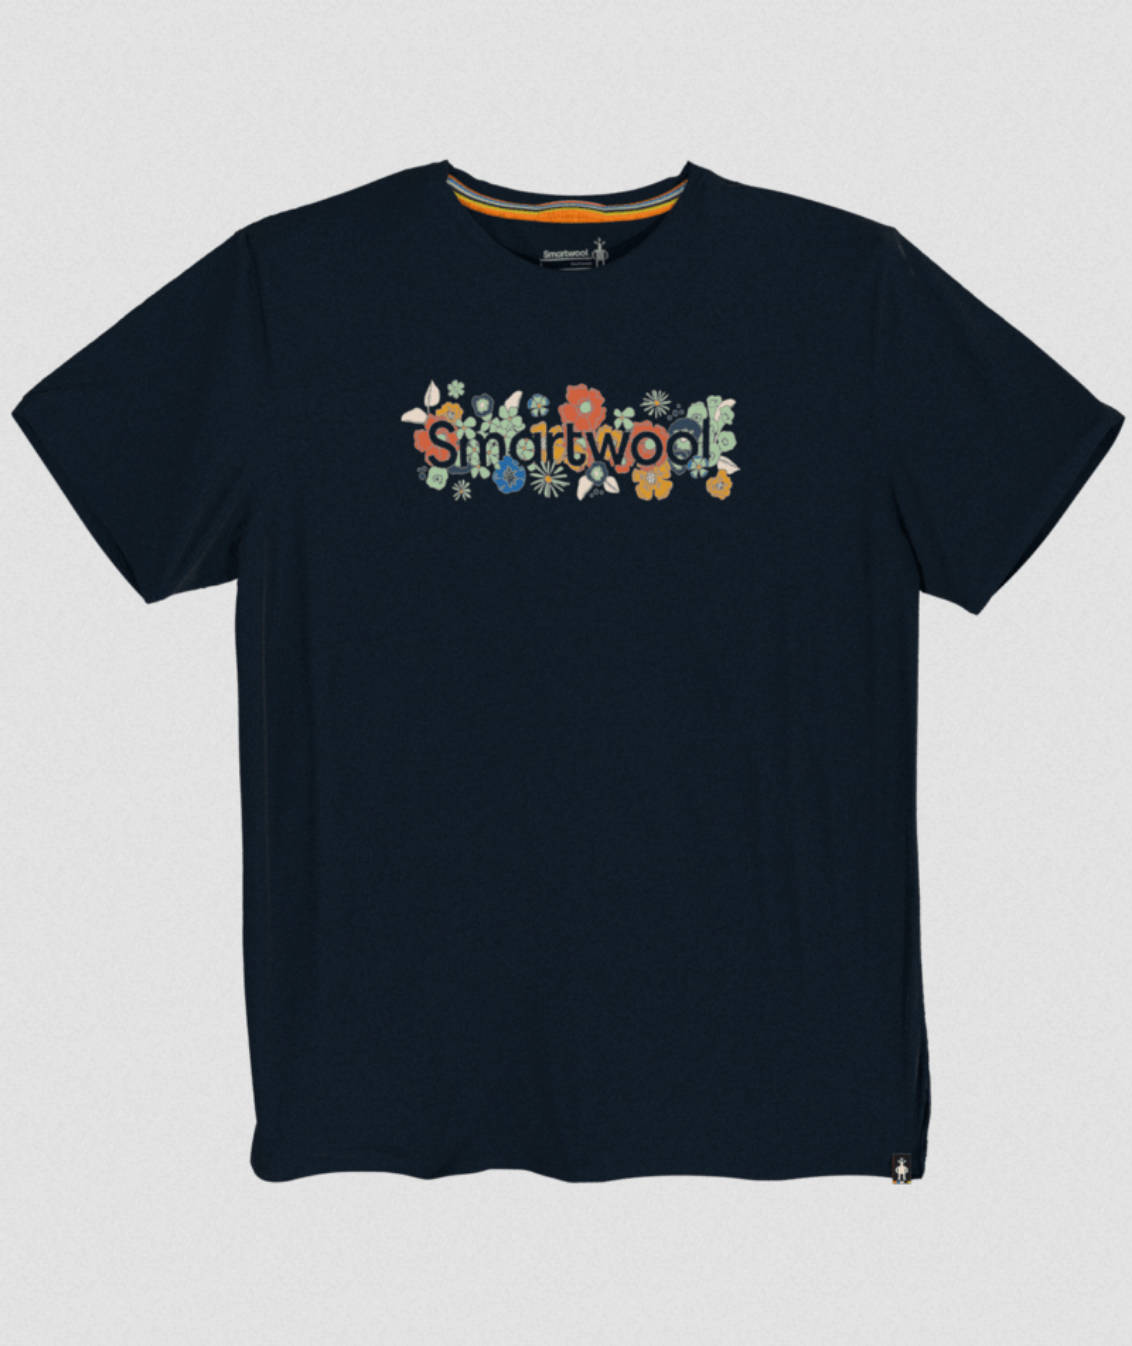 Smartwool Women's Floral Graphic Tee *SALE*